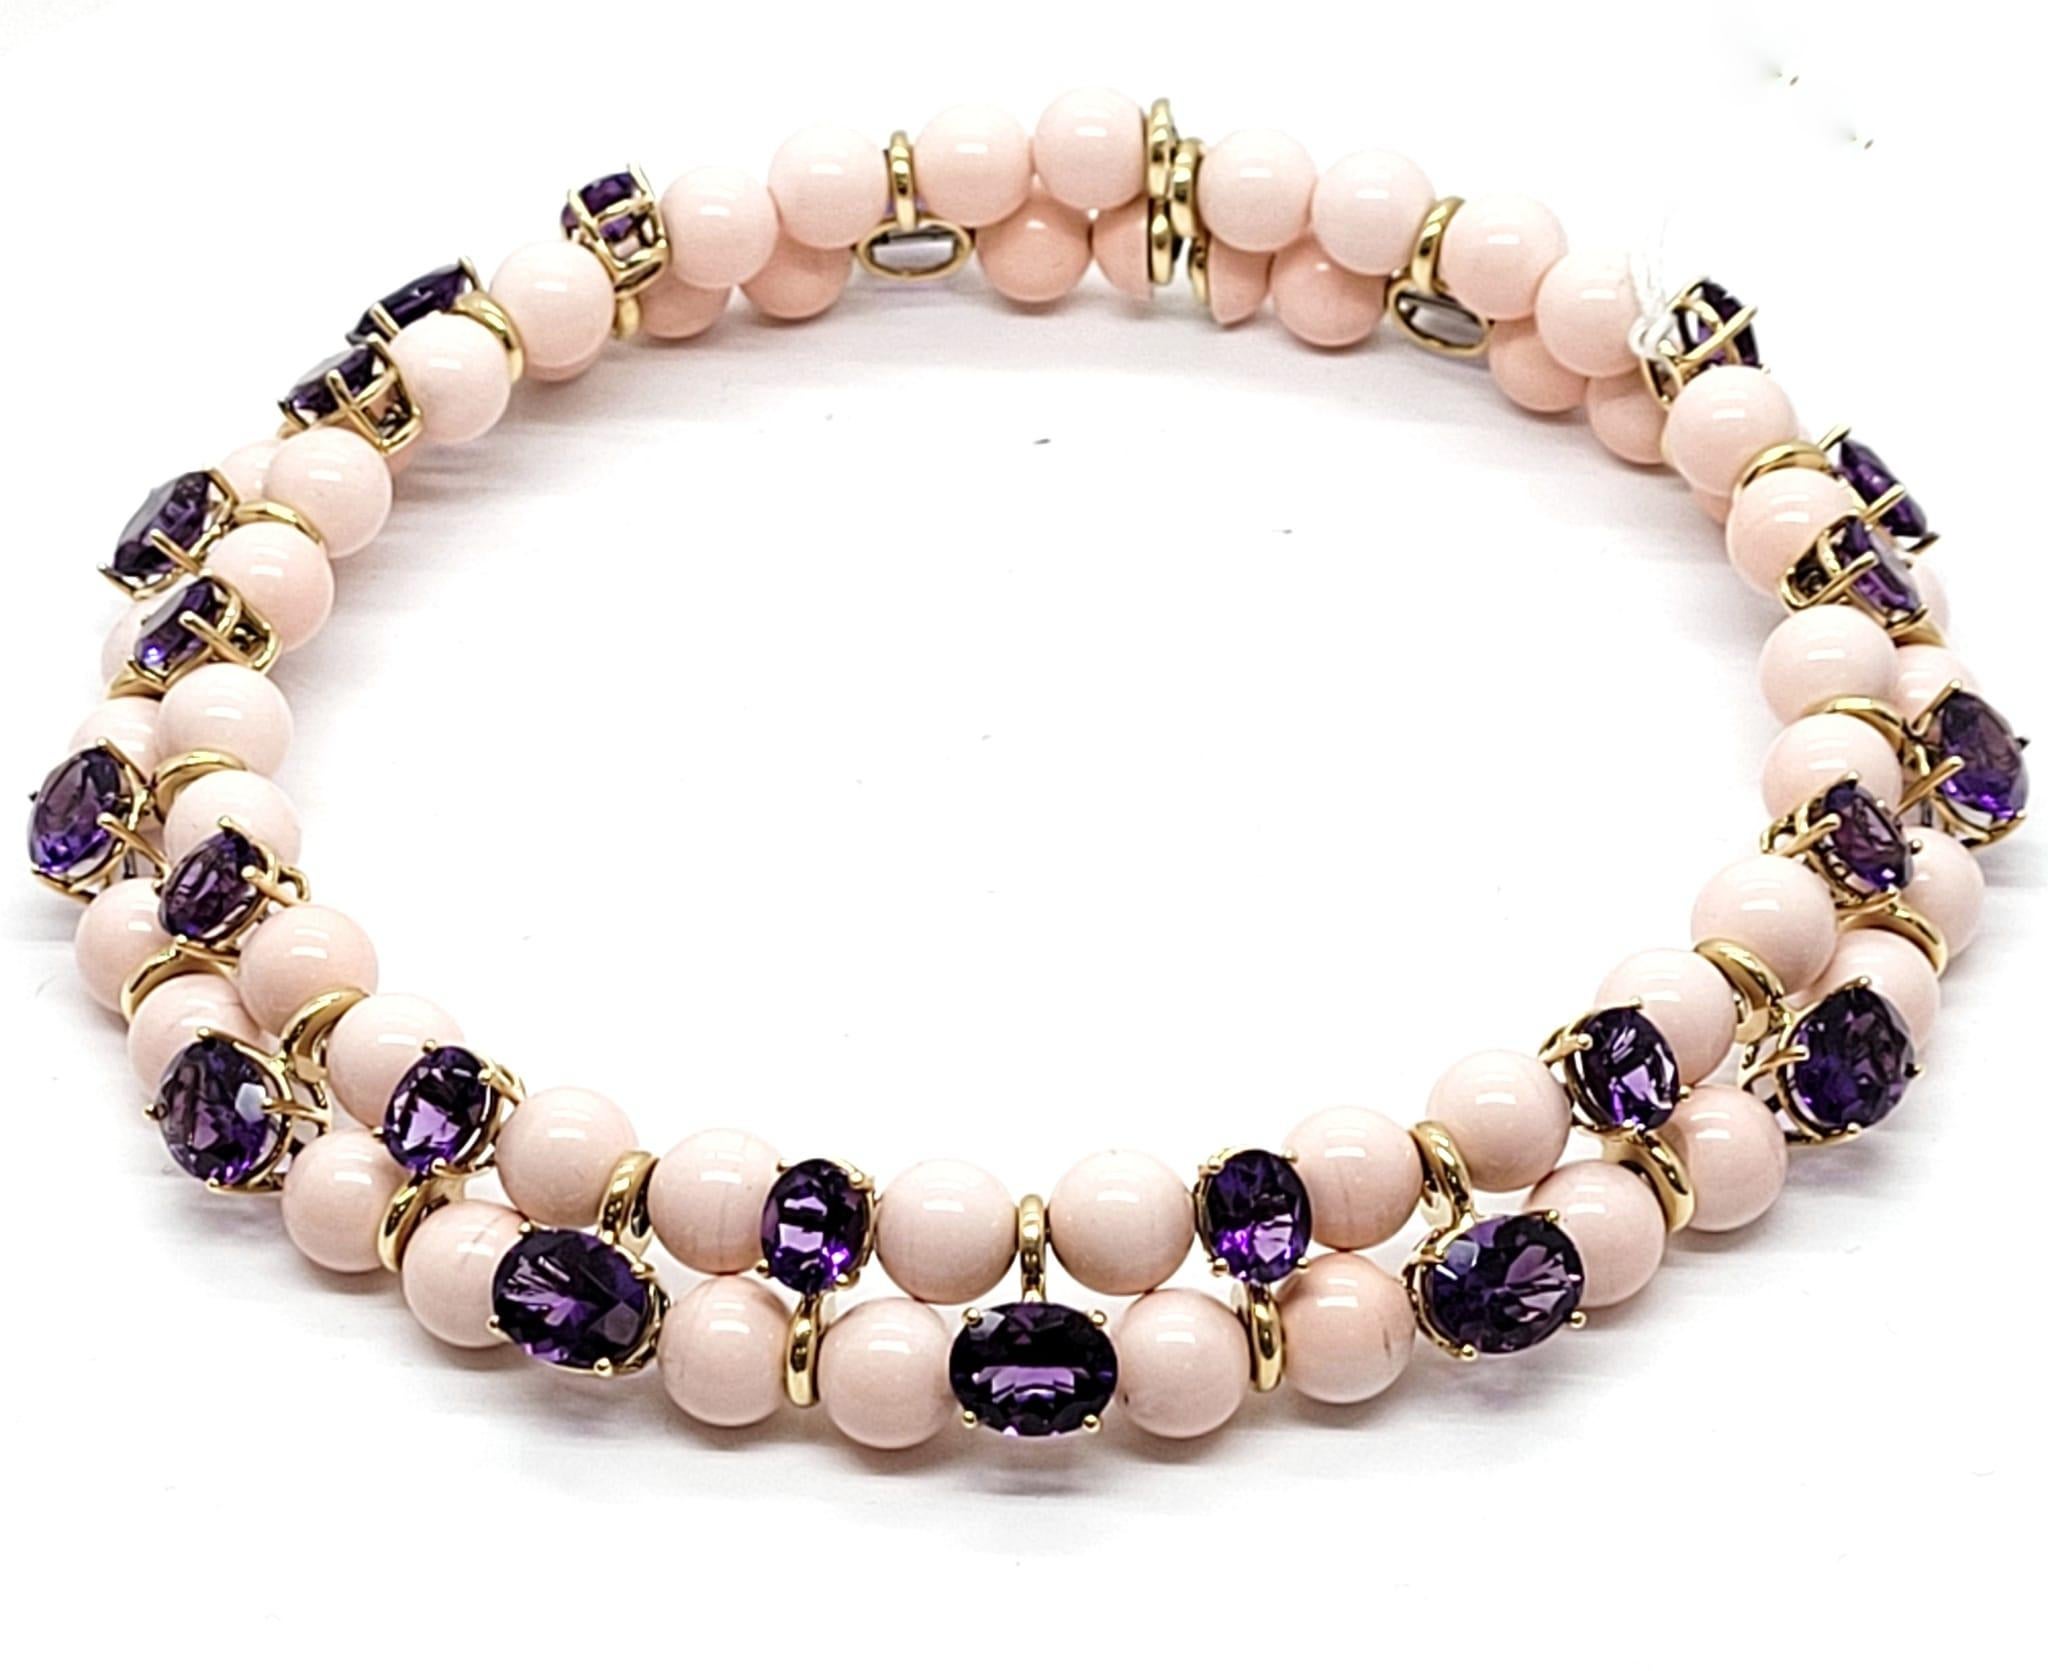 Andreoli 49.94 Carat Amethyst Coral 18 Karat Yellow Gold Choker Necklace

This necklace features:
- 49.94 Carat Amethyst
- Angelskin Coral
- 18K Yellow Gold
- Made In Italy